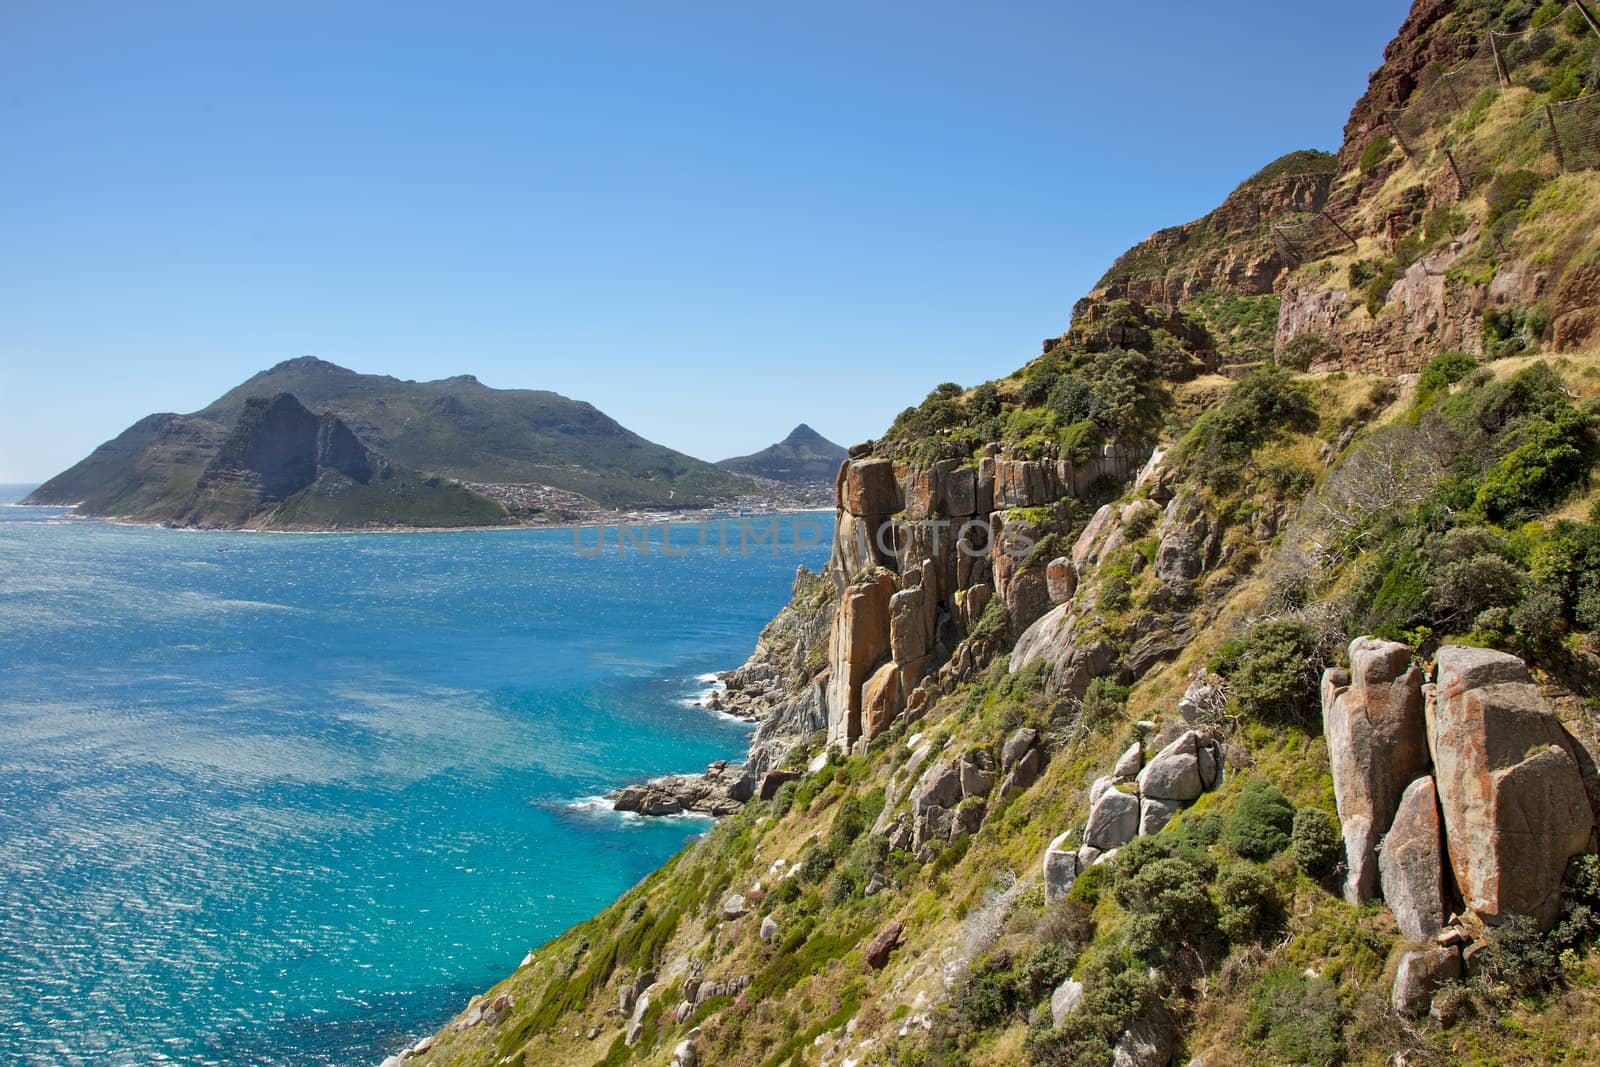 The Sentinel as seen from Chapman's Peak Drive, Cape Peninsula, South Africa.